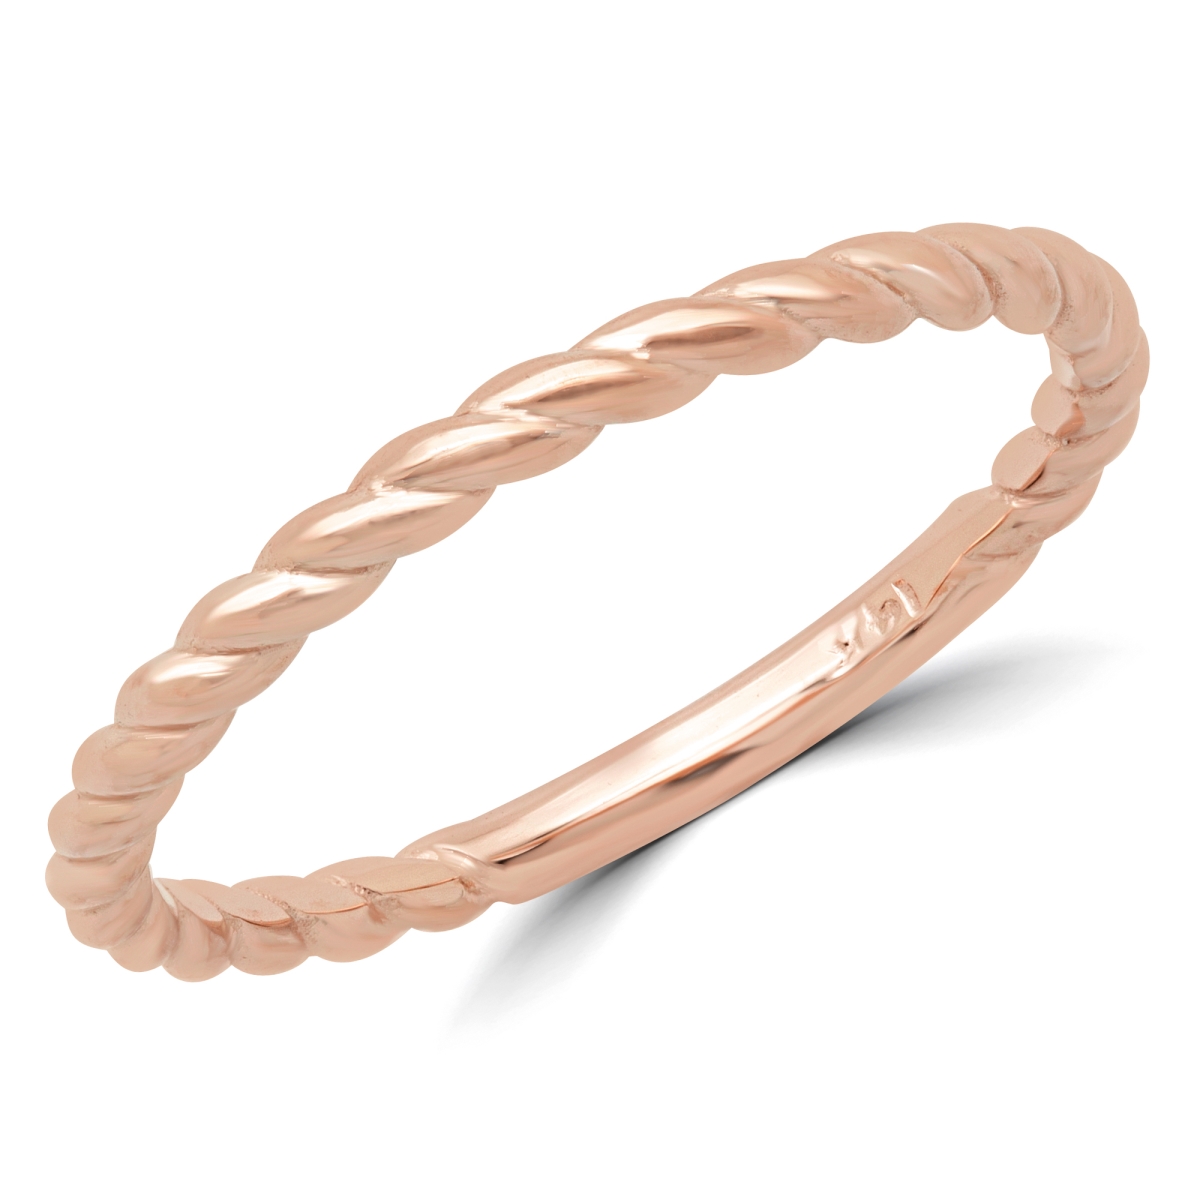 Picture of Majesty Diamonds MD180603-5 Braided Rope Classic Wedding Band Ring in 14K Rose Gold - Size 5